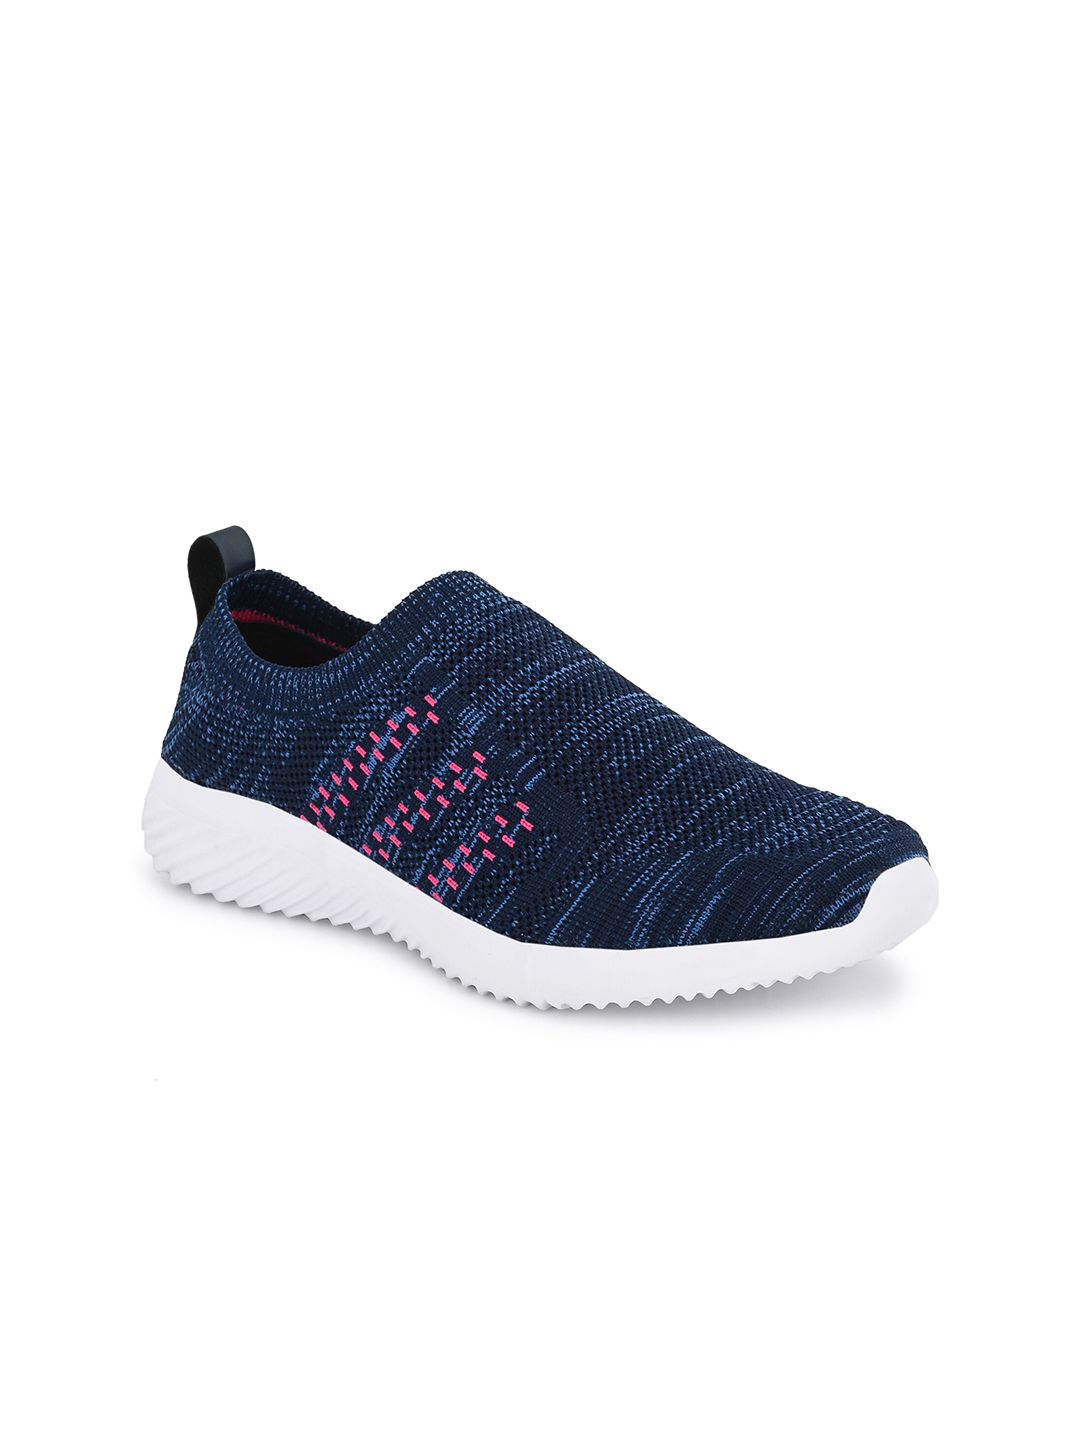 OFF LIMITS Women Navy Blue Mesh Walking Non-Marking Shoes Price in India